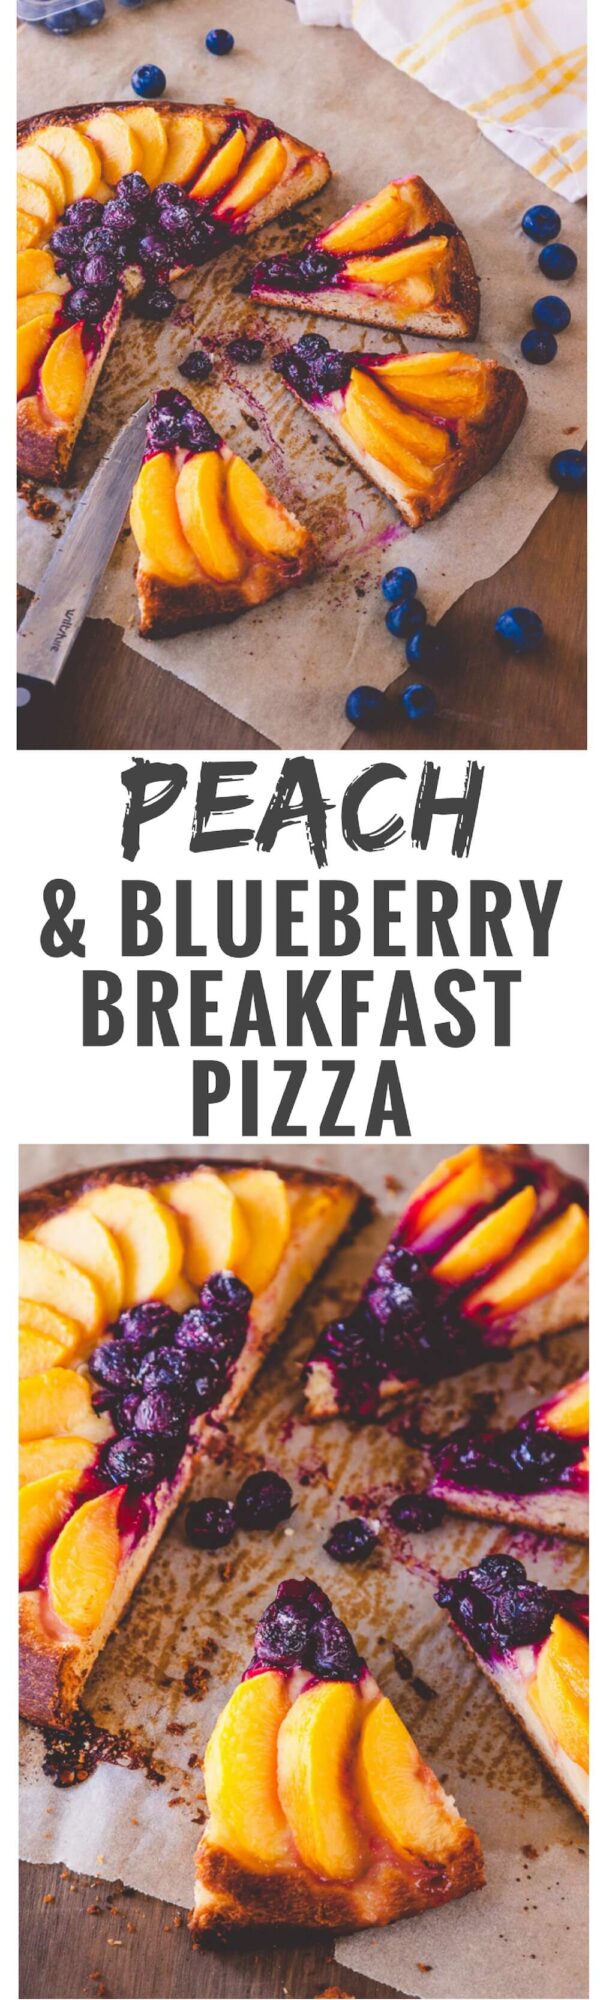 Looking for a decadent weekend breakfast treat? Then this peach and blueberry breakfast pizza recipe might just fit the bill.